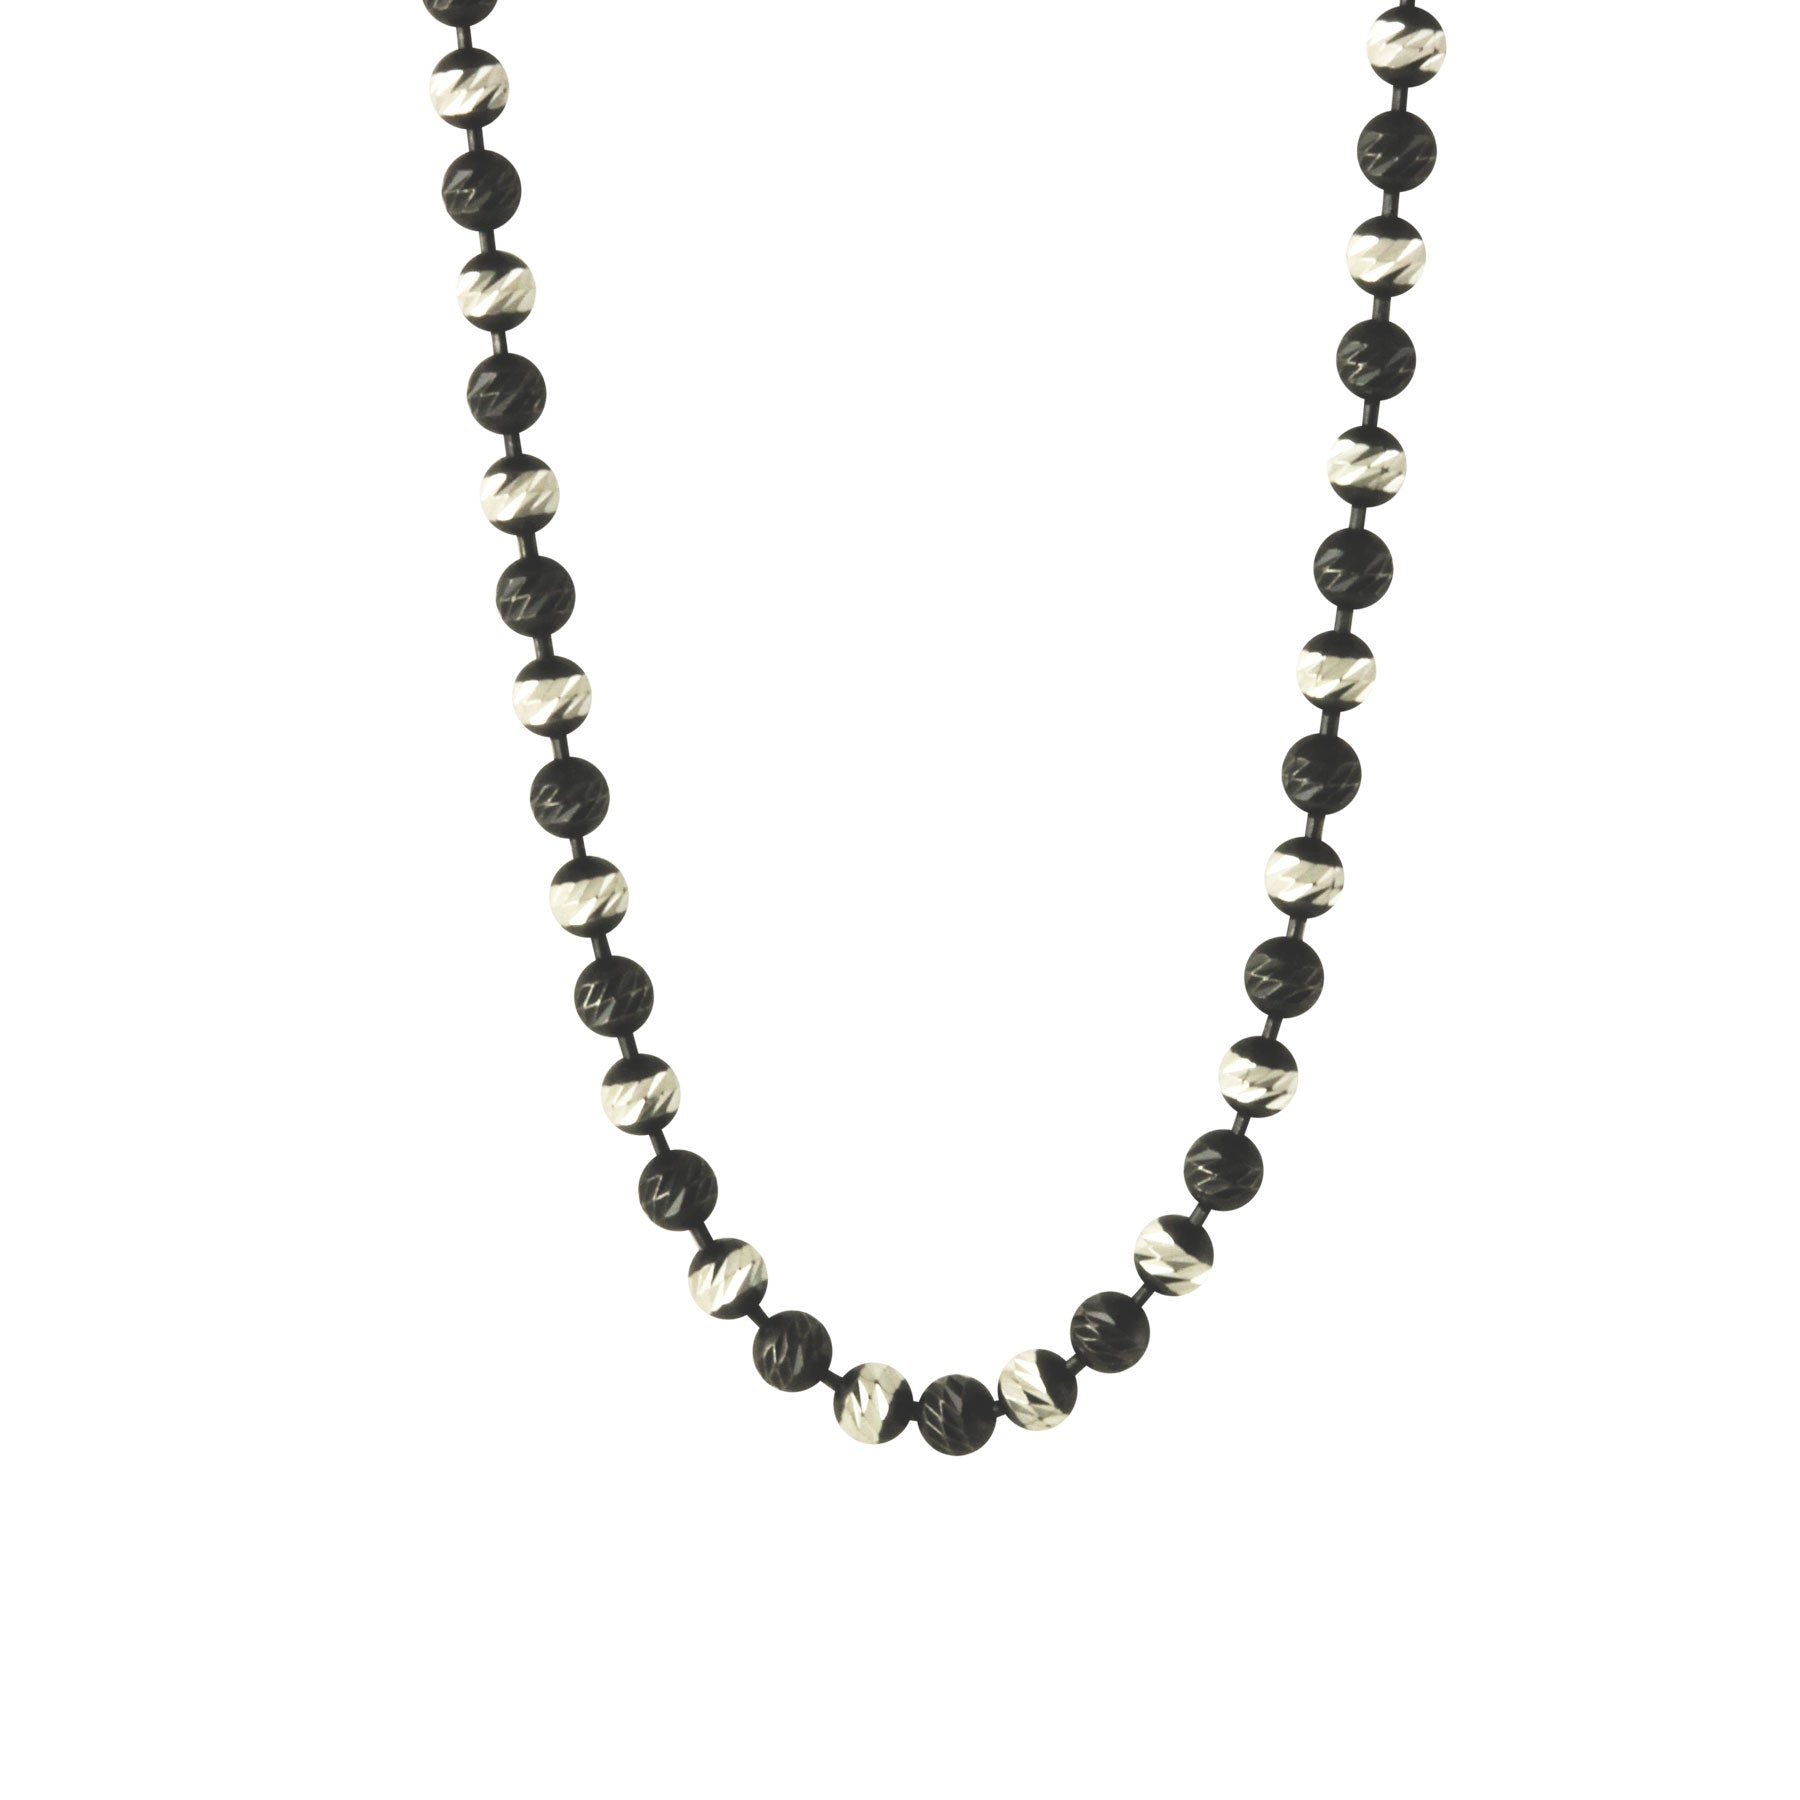 Black & White Sterling Silver Beaded Chain Necklace 16 - 24 inch Sterling Silver / 24 inch